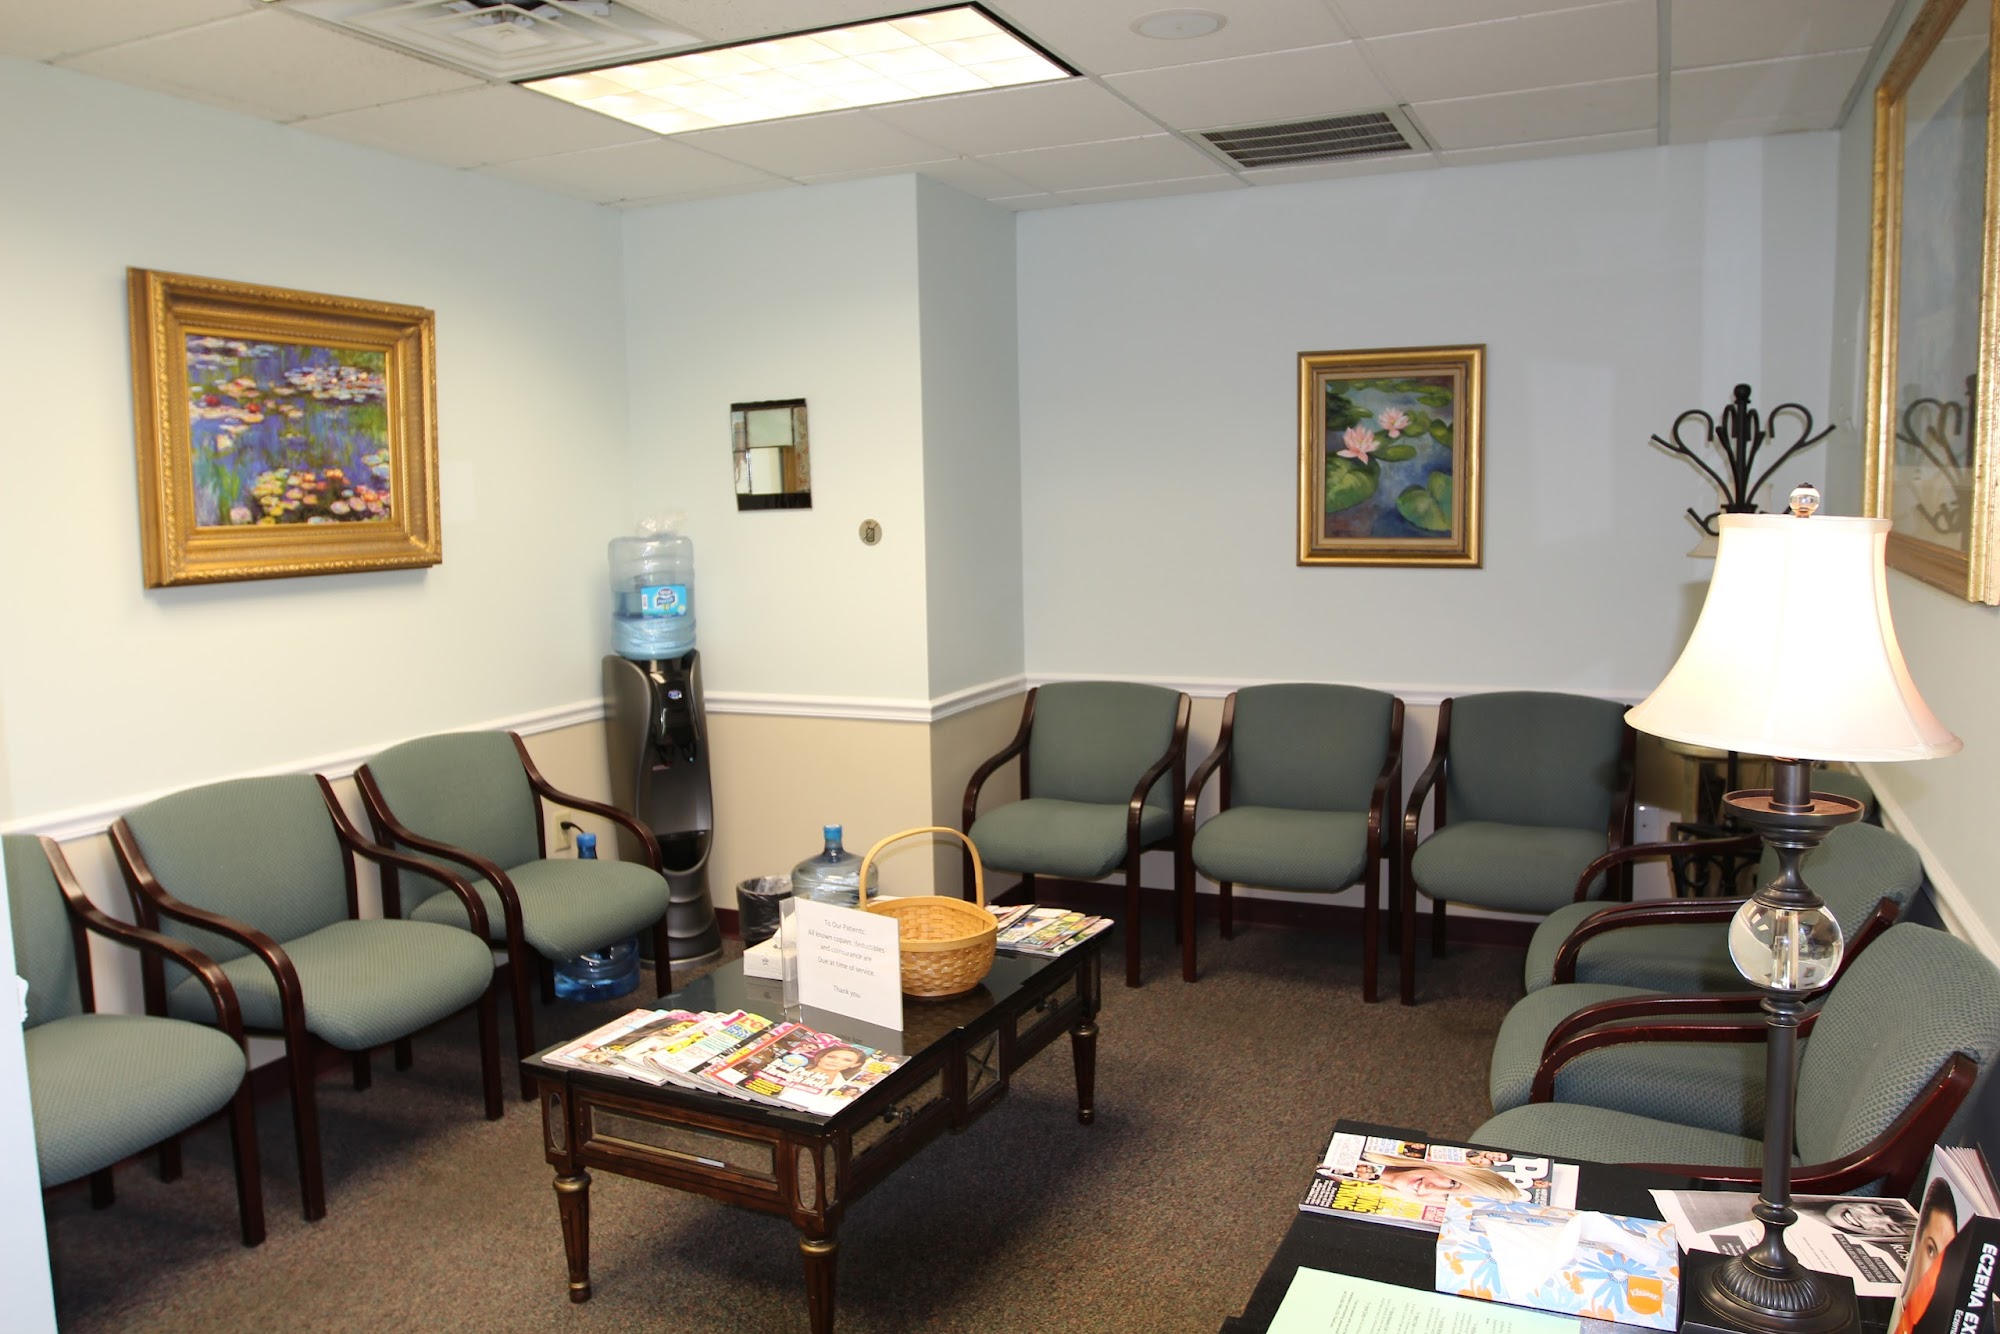 Advanced Dermatology and Cosmetic Surgery - Flourtown 1107 Bethlehem Pike Suite 210 and 103, Flourtown Pennsylvania 19031